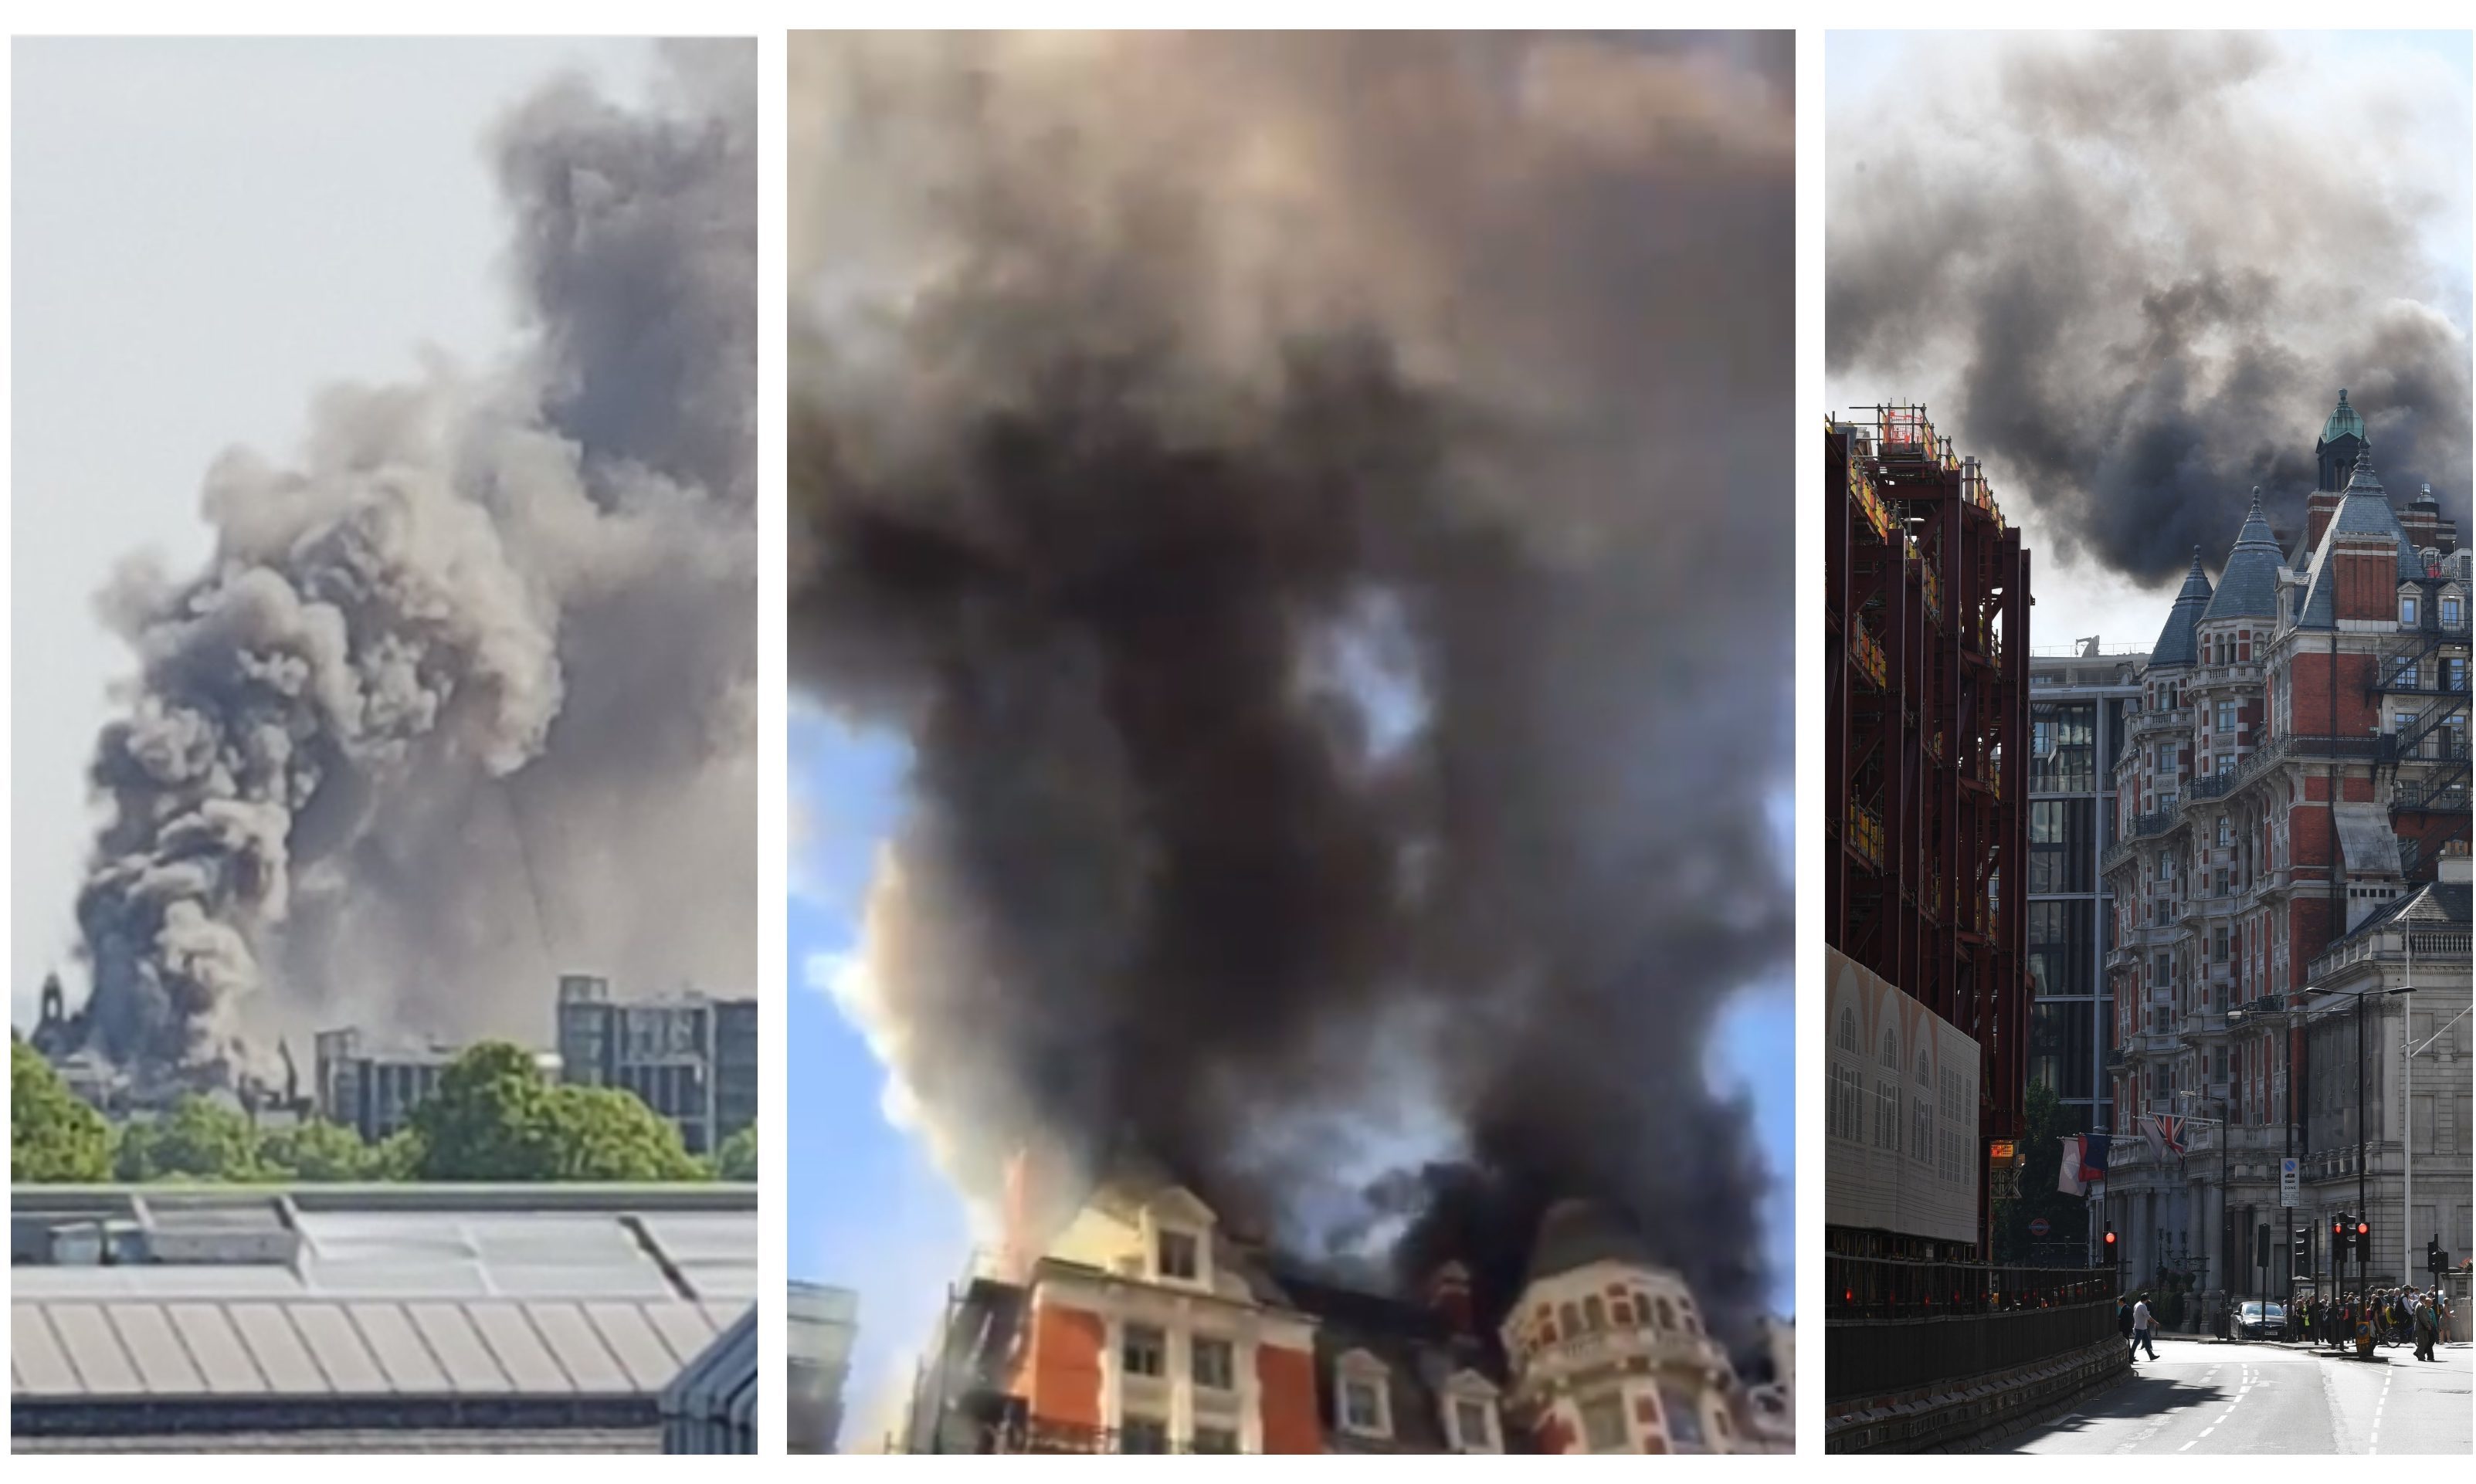 The fire in London